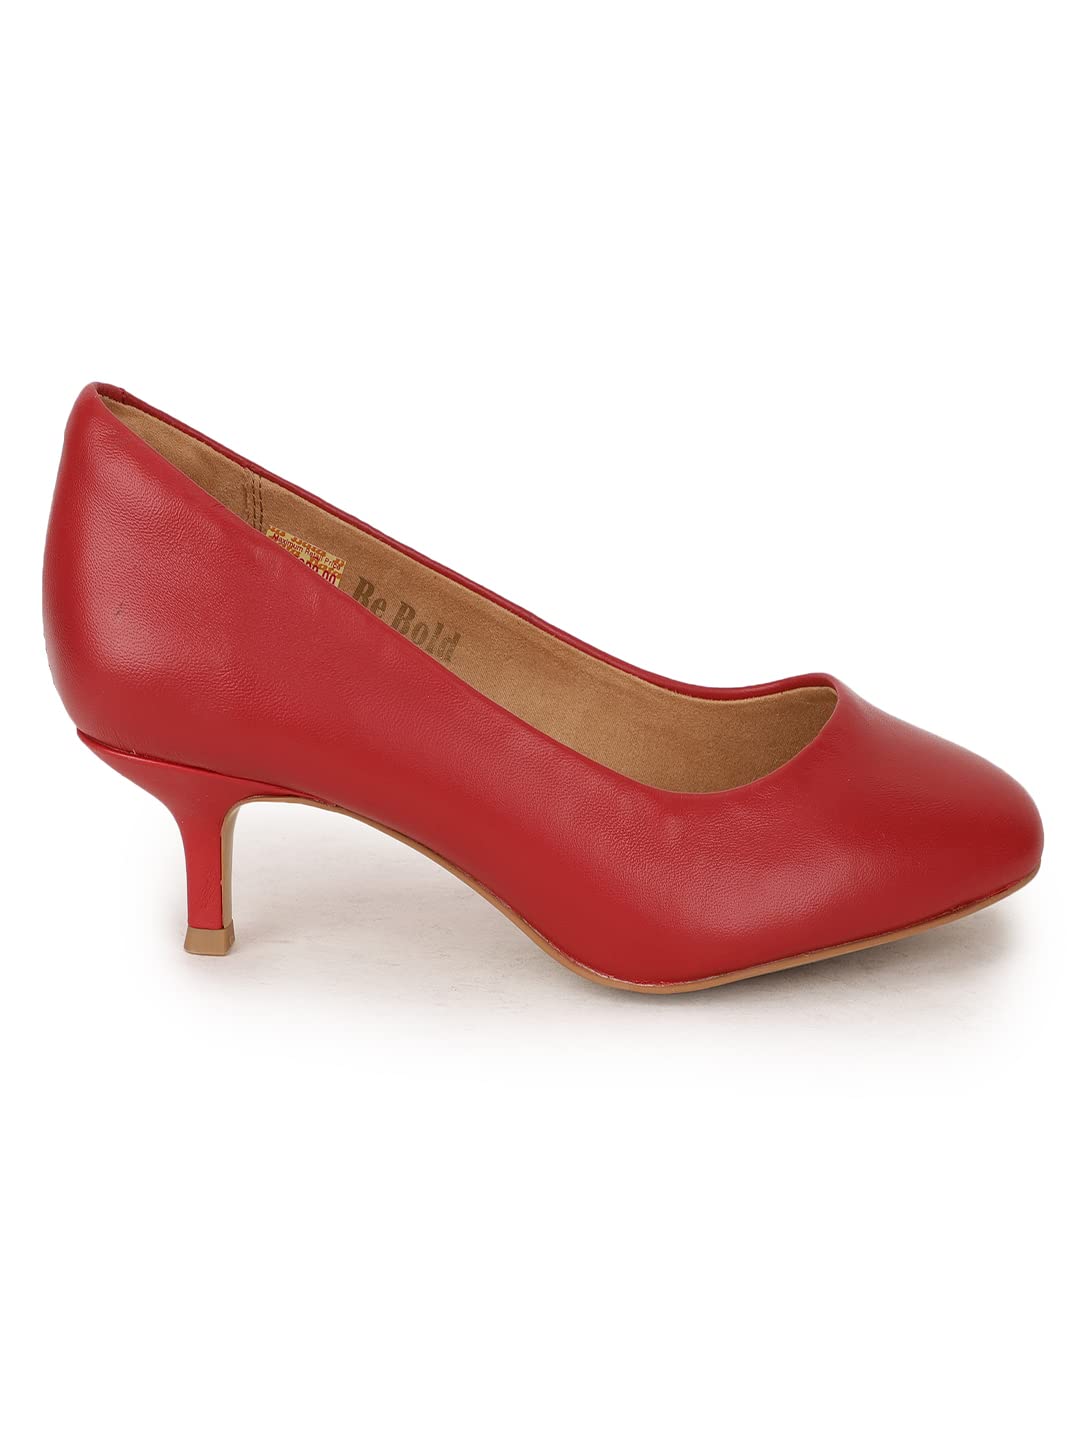 Hush Puppies Womens All Day Pump Red Pump